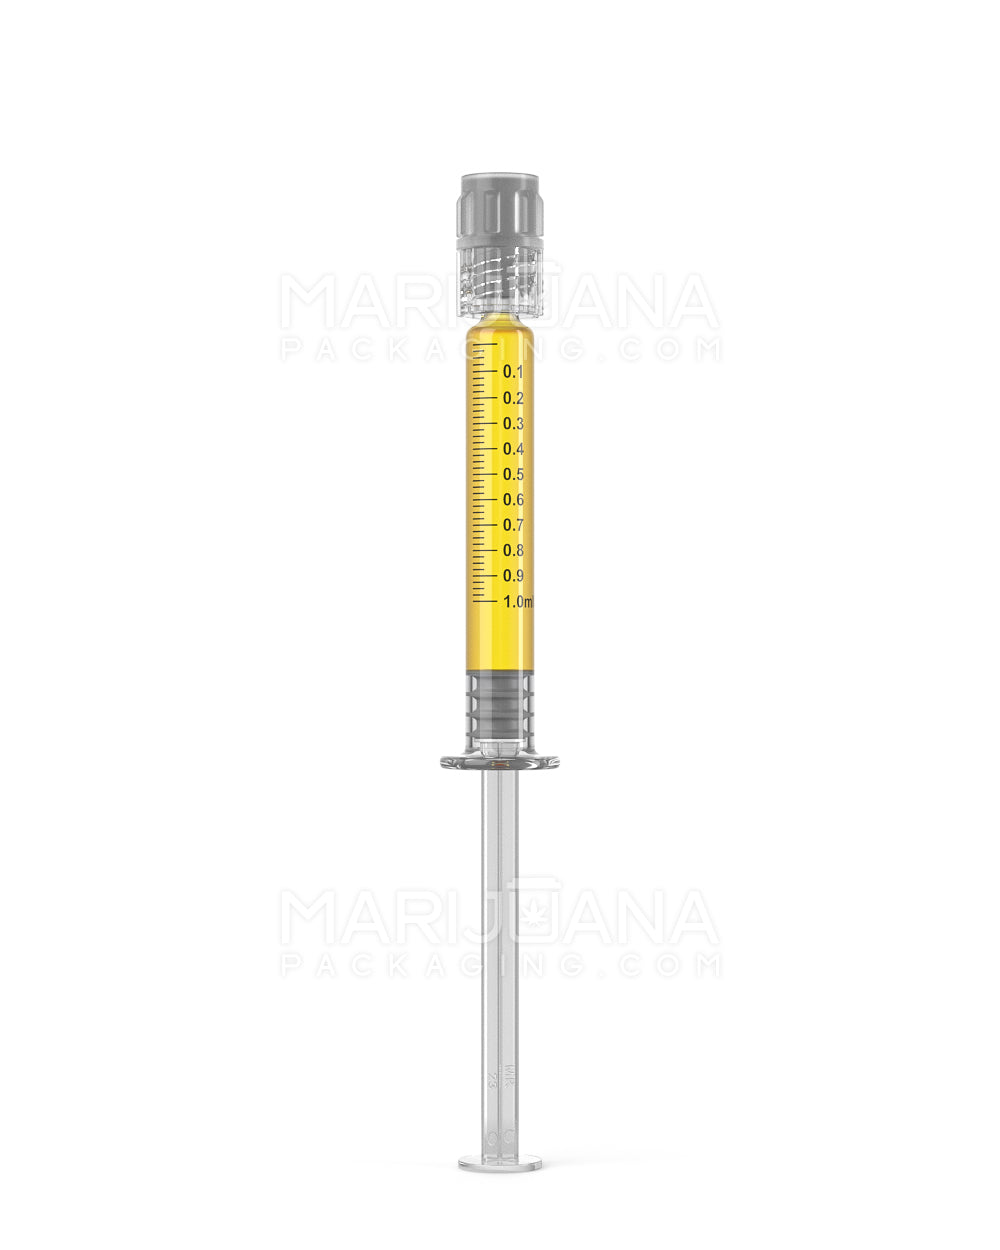 Luer Lock | Long Glass Dab Applicator Syringes | 1mL - 0.1mL Increments - 100 Count - 2